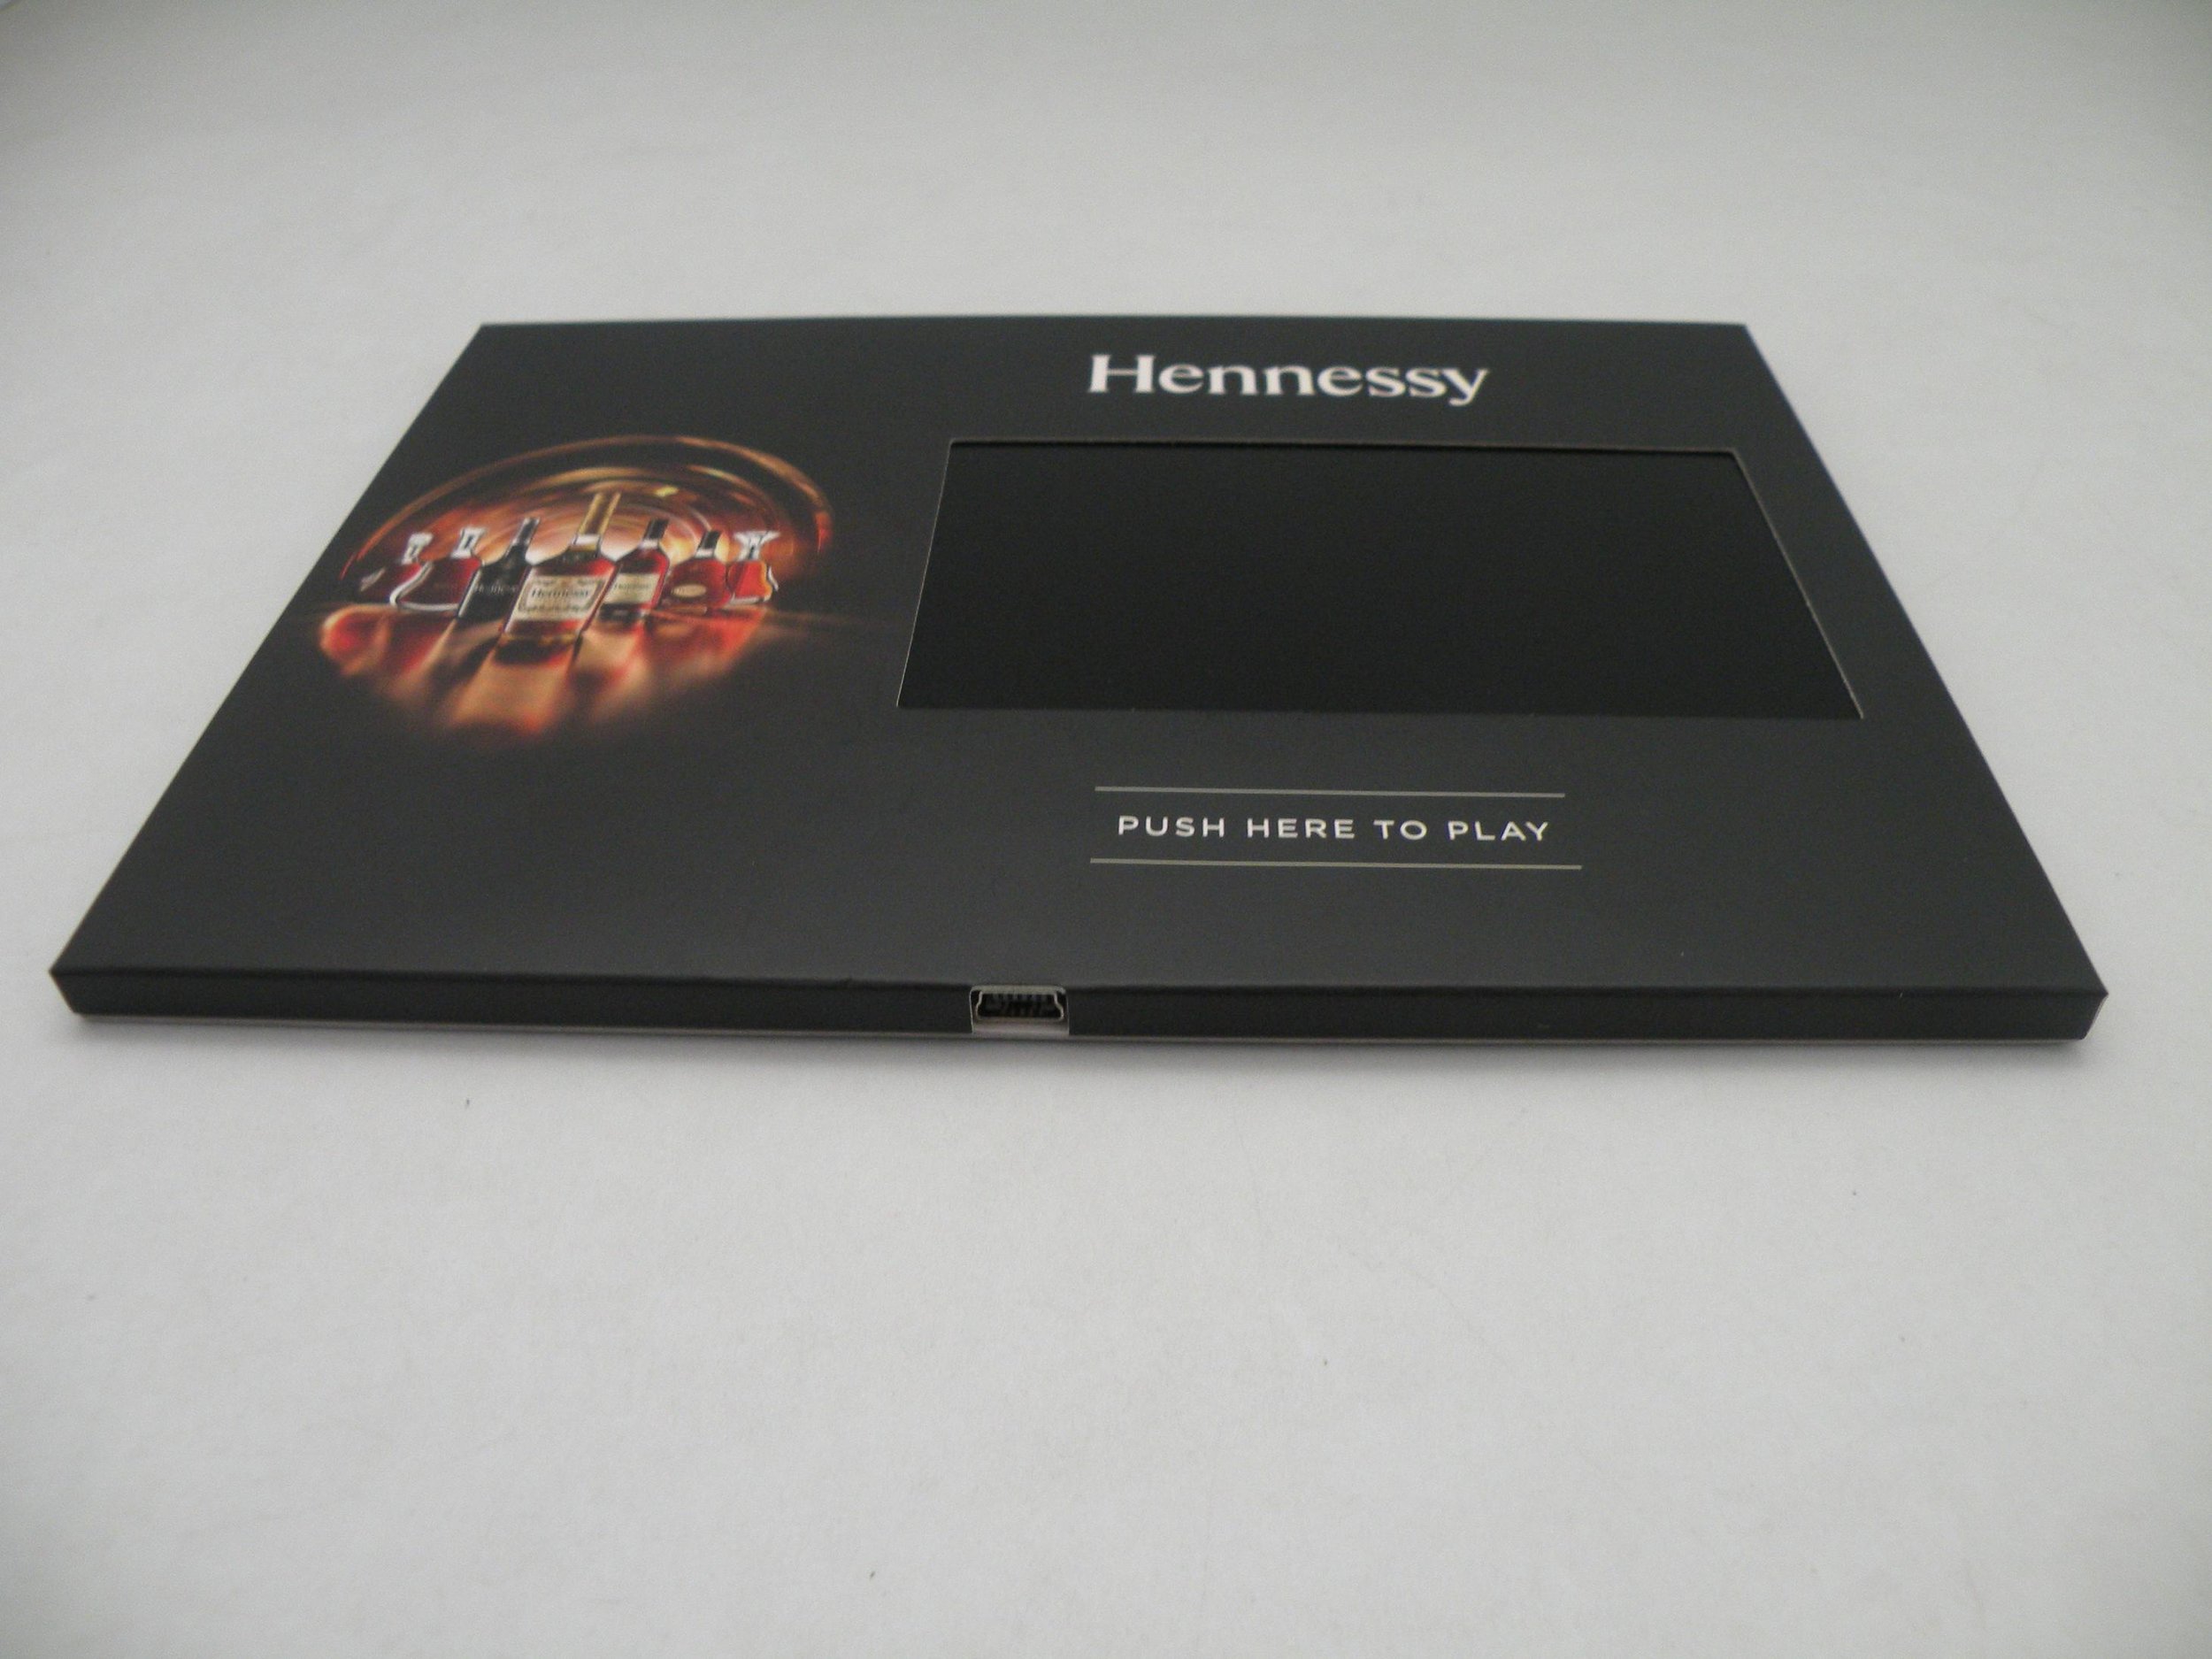 Digital Video Cards for hennessy-side